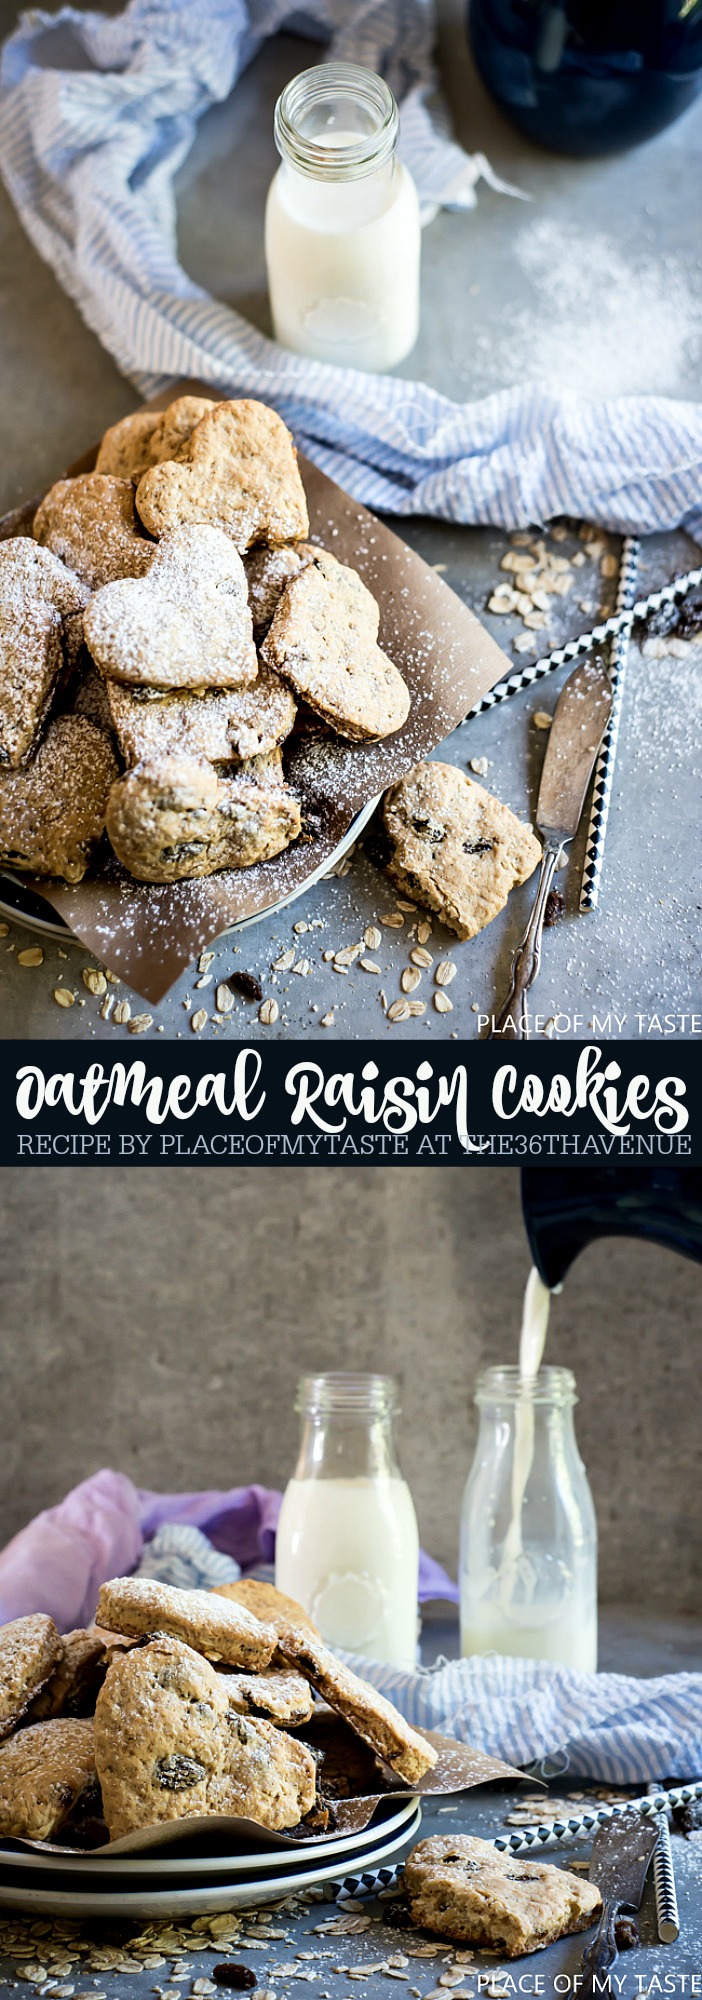 Oatmeal Cookies - This Oatmeal Raisin Cookie Recipe is delicious and perfect for dessert or snacks. 